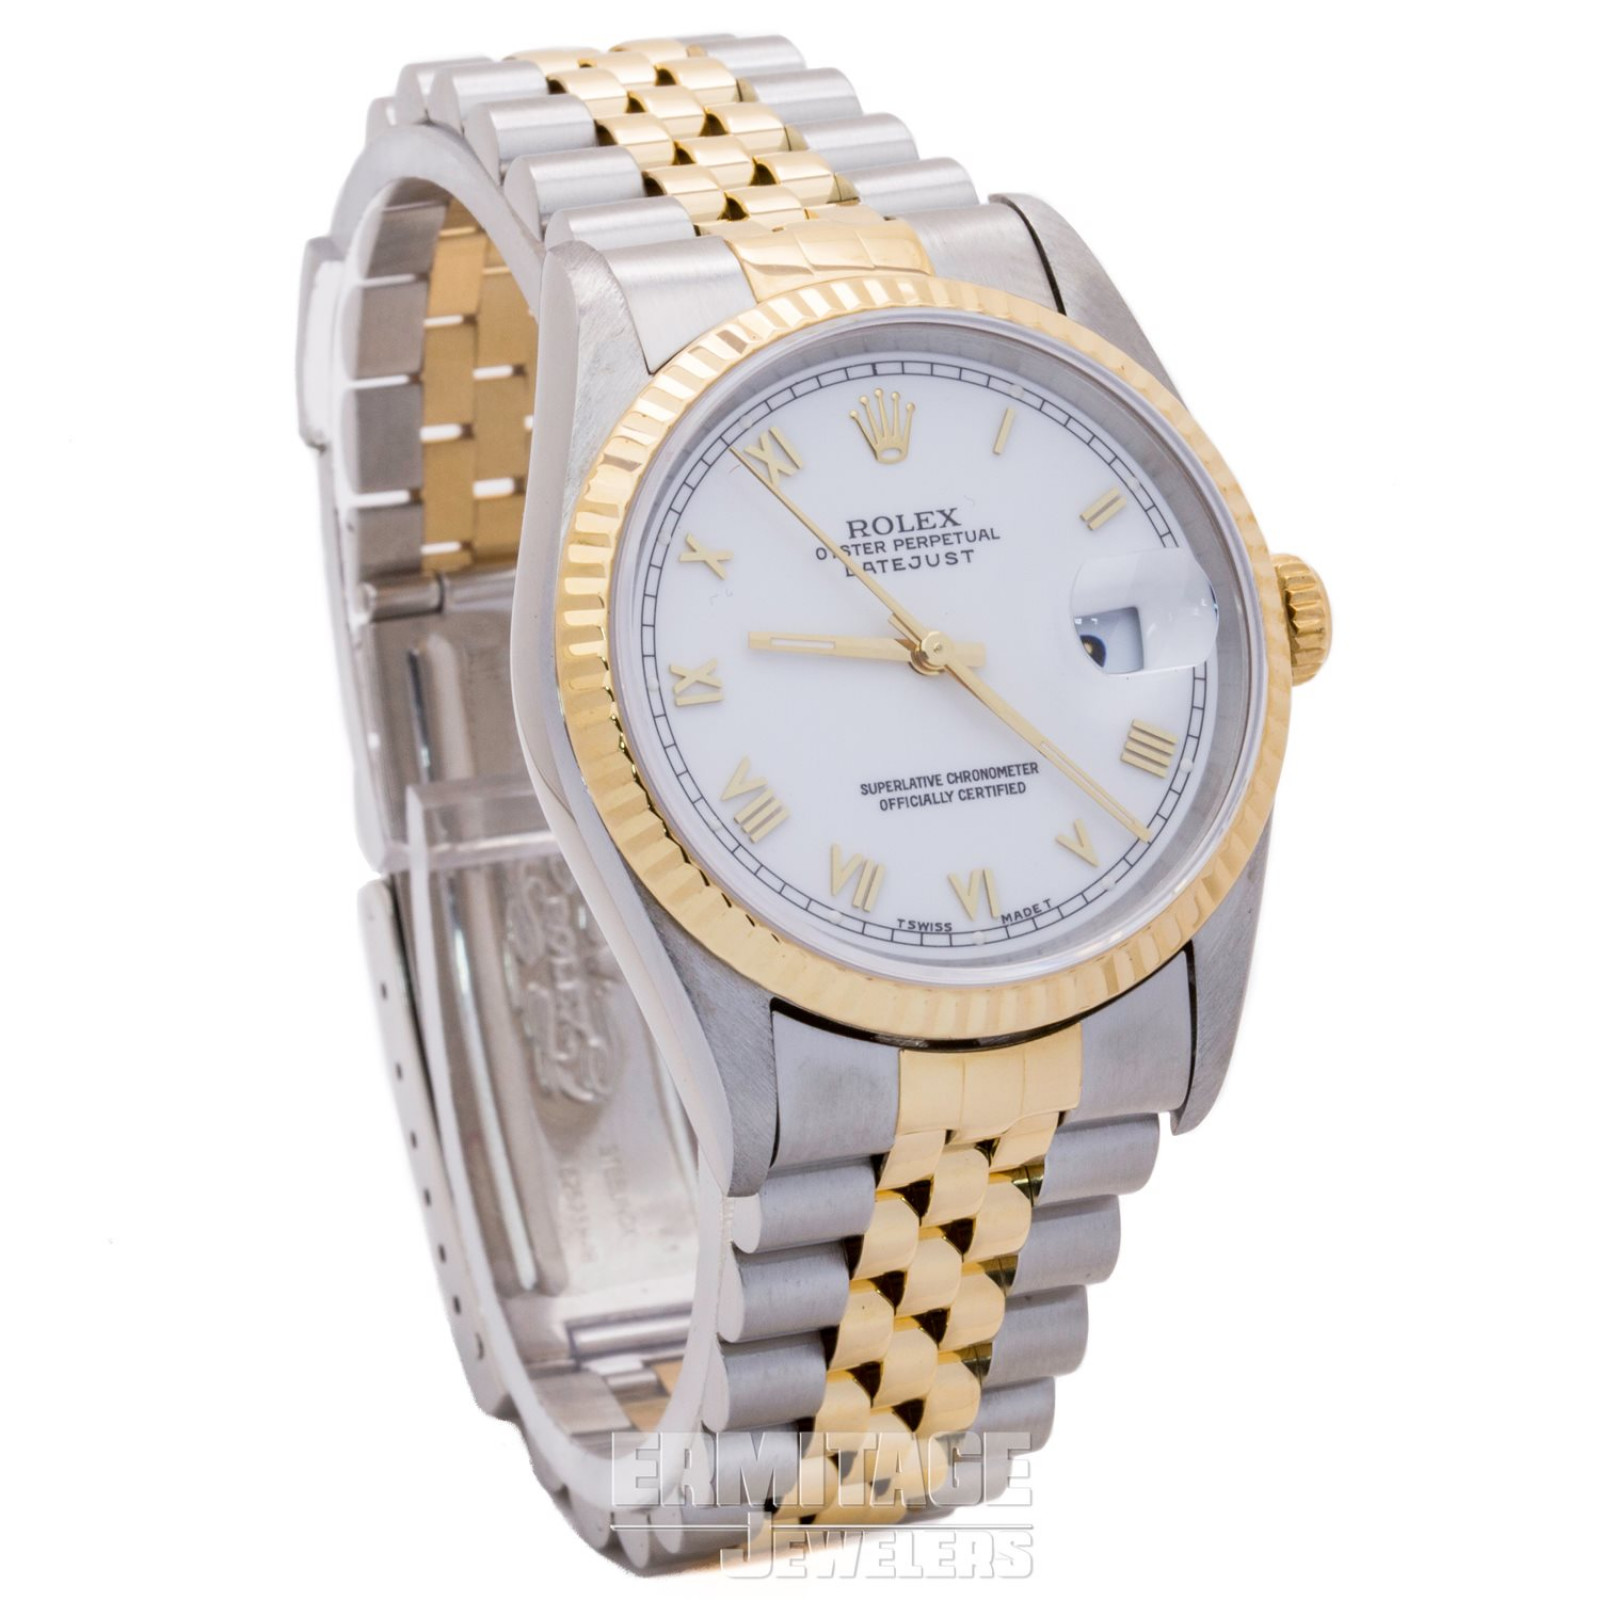 Two Tone Rolex Datejust 16233 with White Dial